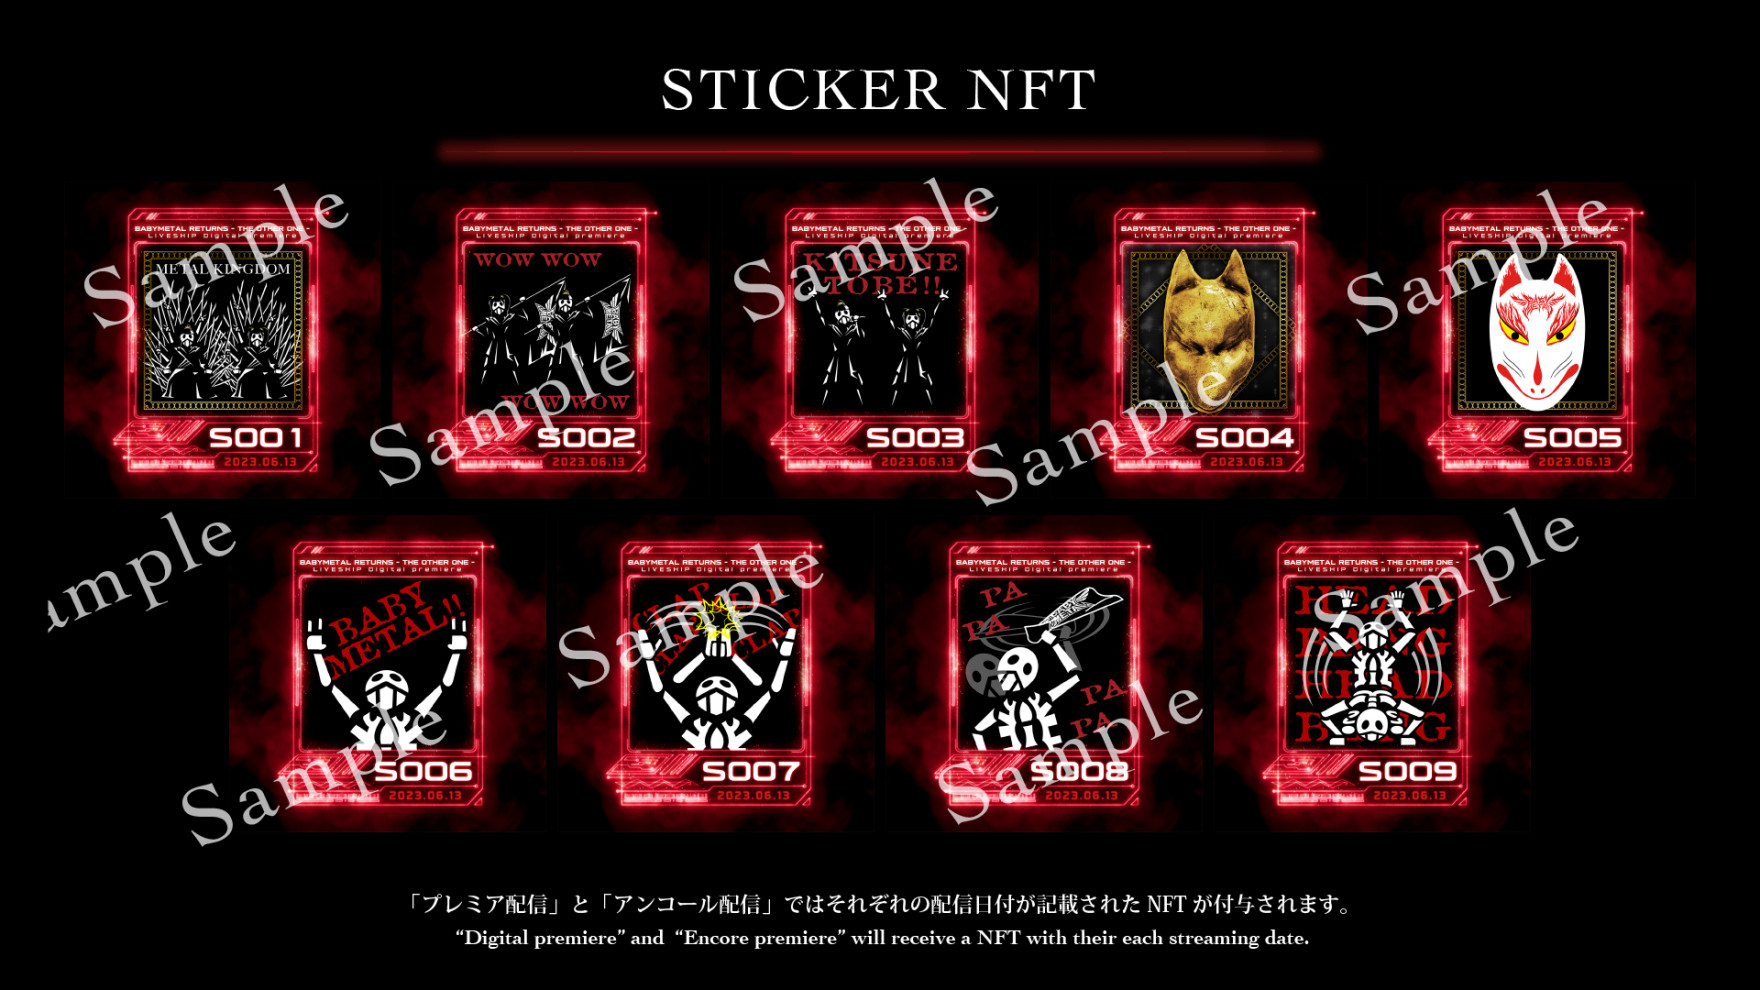 Kulture has launched NFT for "Viewing Tickets" and "Paid Stickers" for BABYMETAL Live Streaming.
The stickers are no longer expendable.
Users now can make own sticker collection as a token of the support for the artists!!